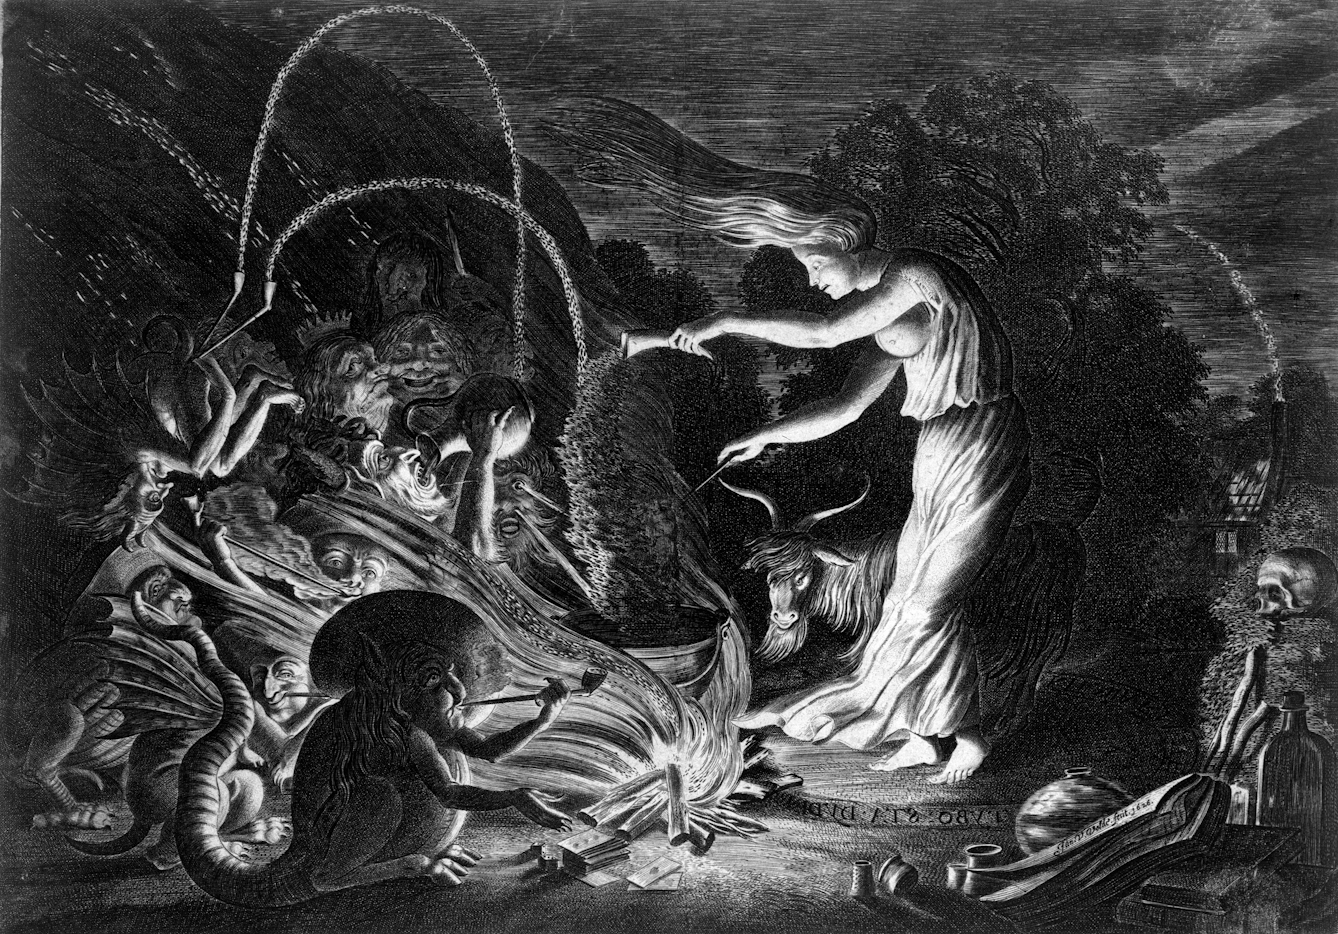 Black and white etching showing a witch preparing something in a cauldron, surrounded by strange looking creatures.